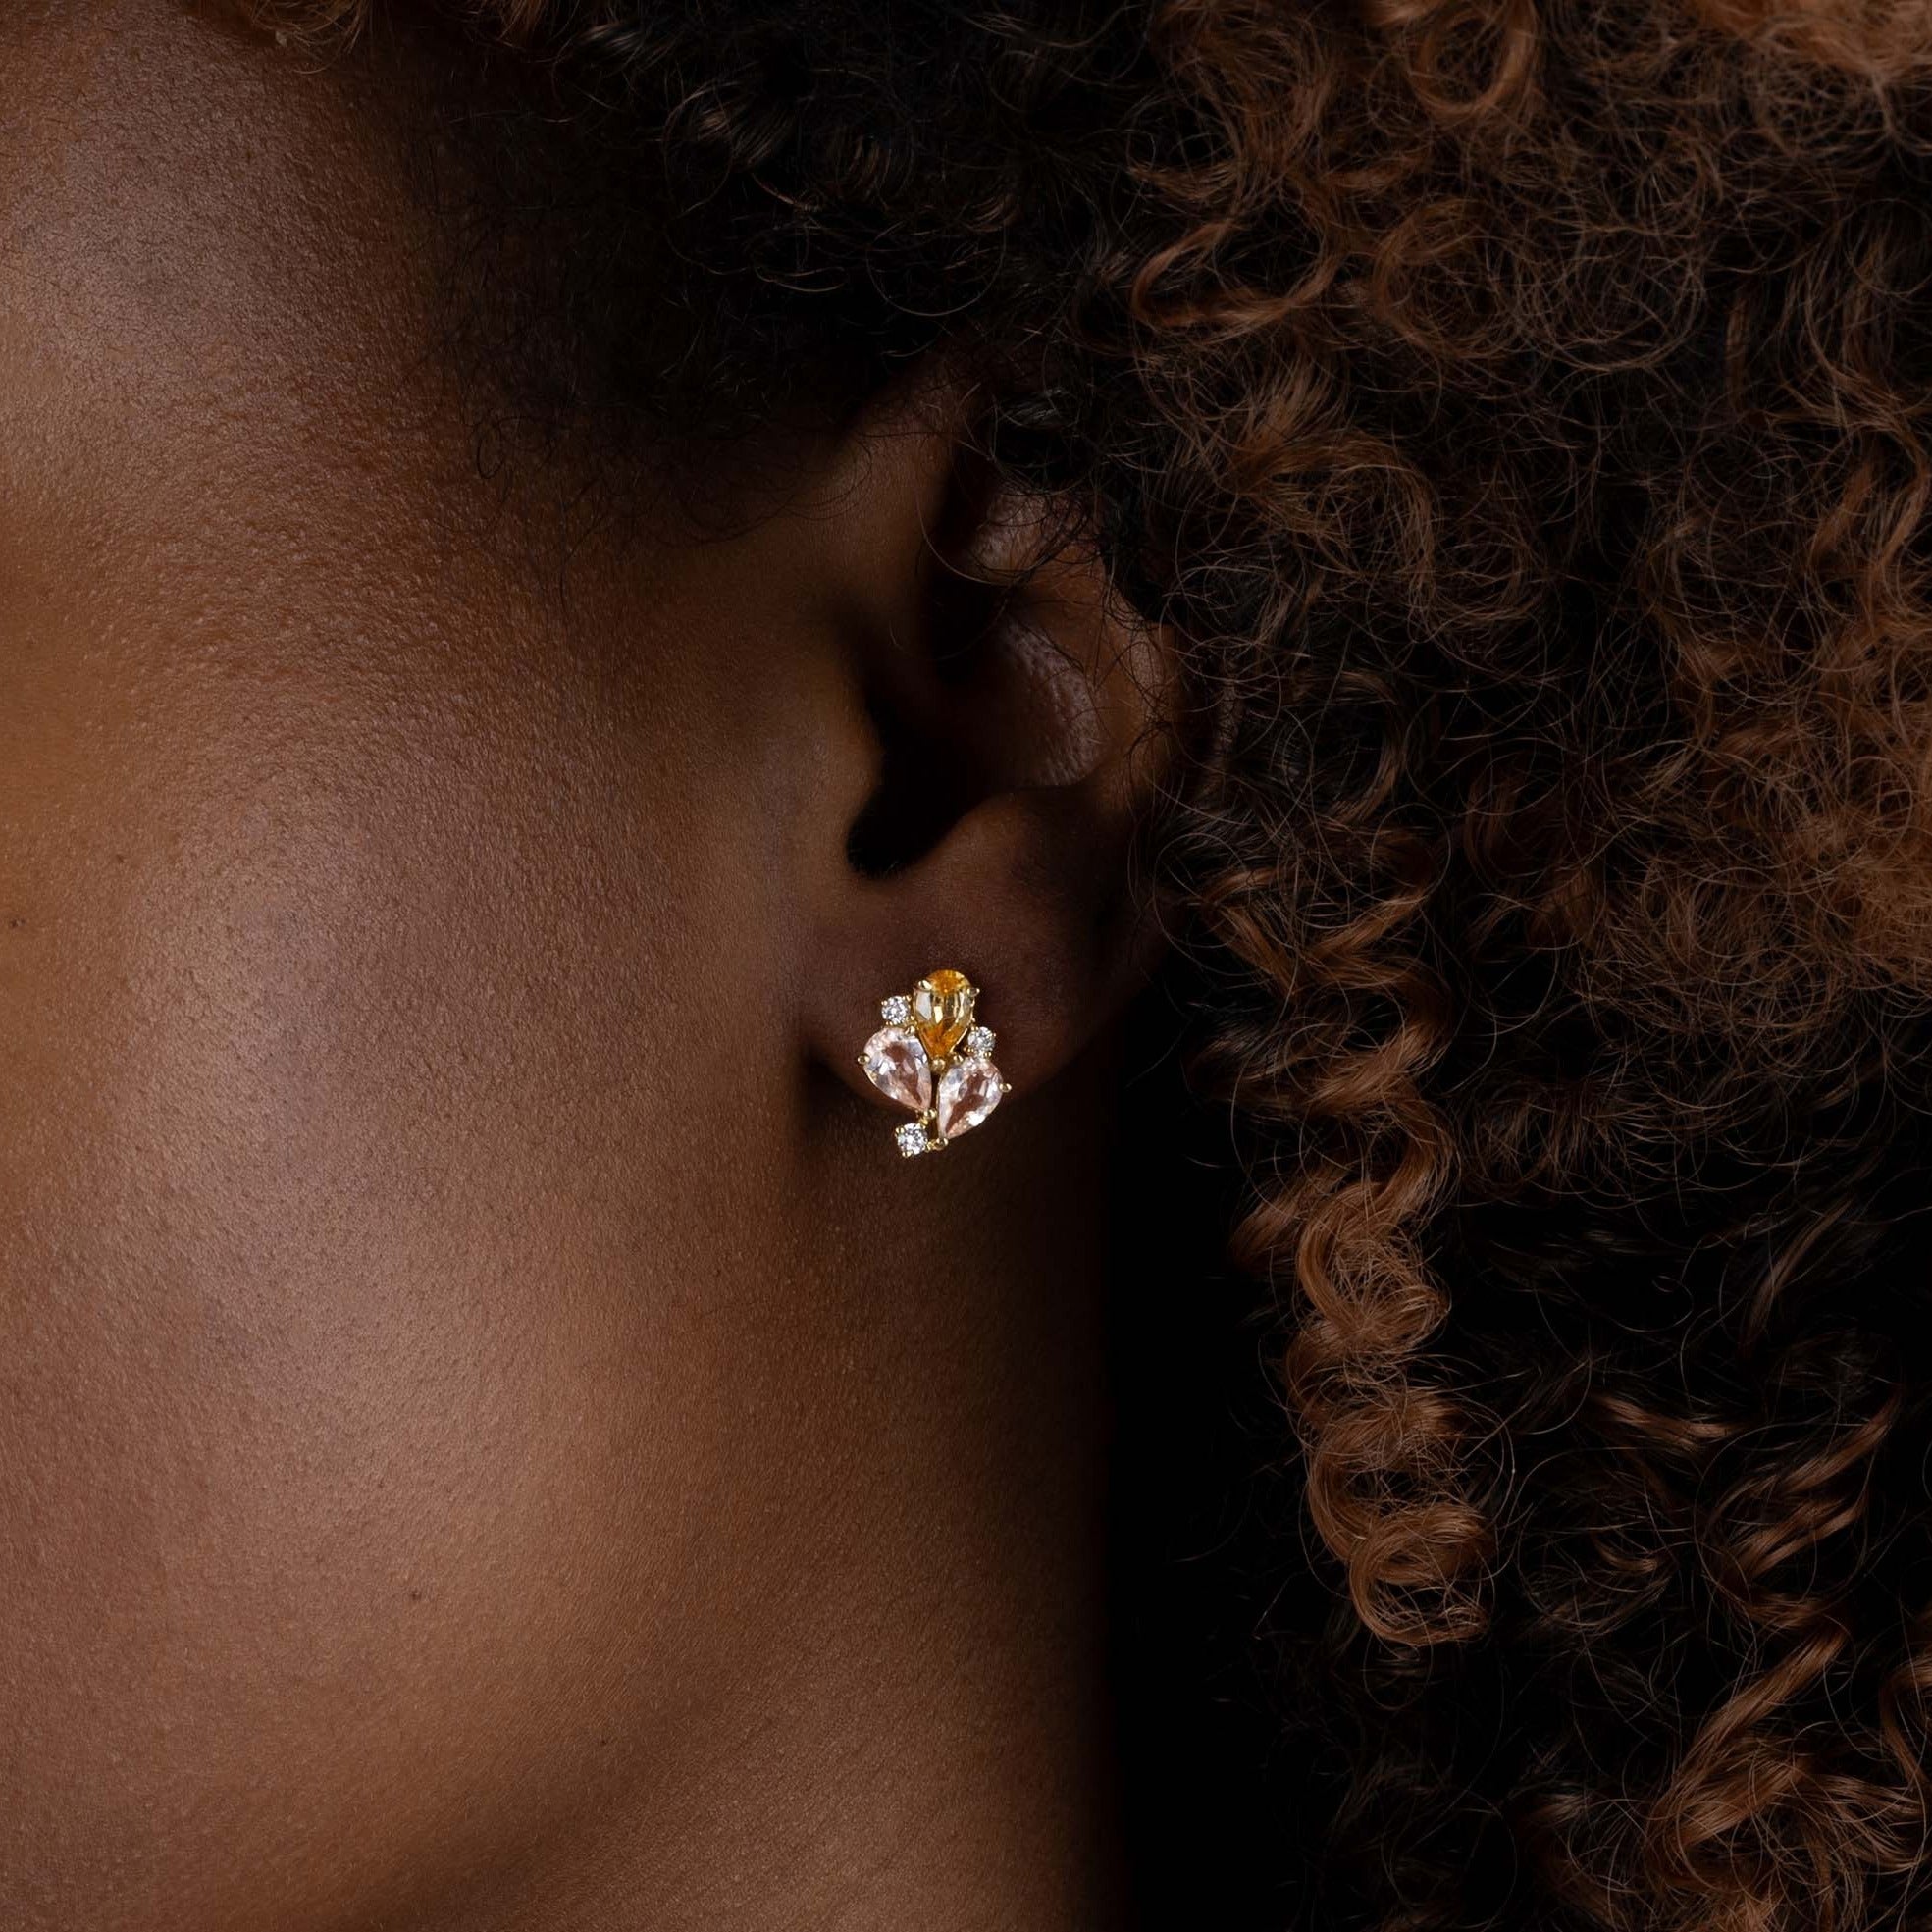 White Gold Earrings with Yellow Sapphires and Morganite, and Diamonds, Small - Model shot